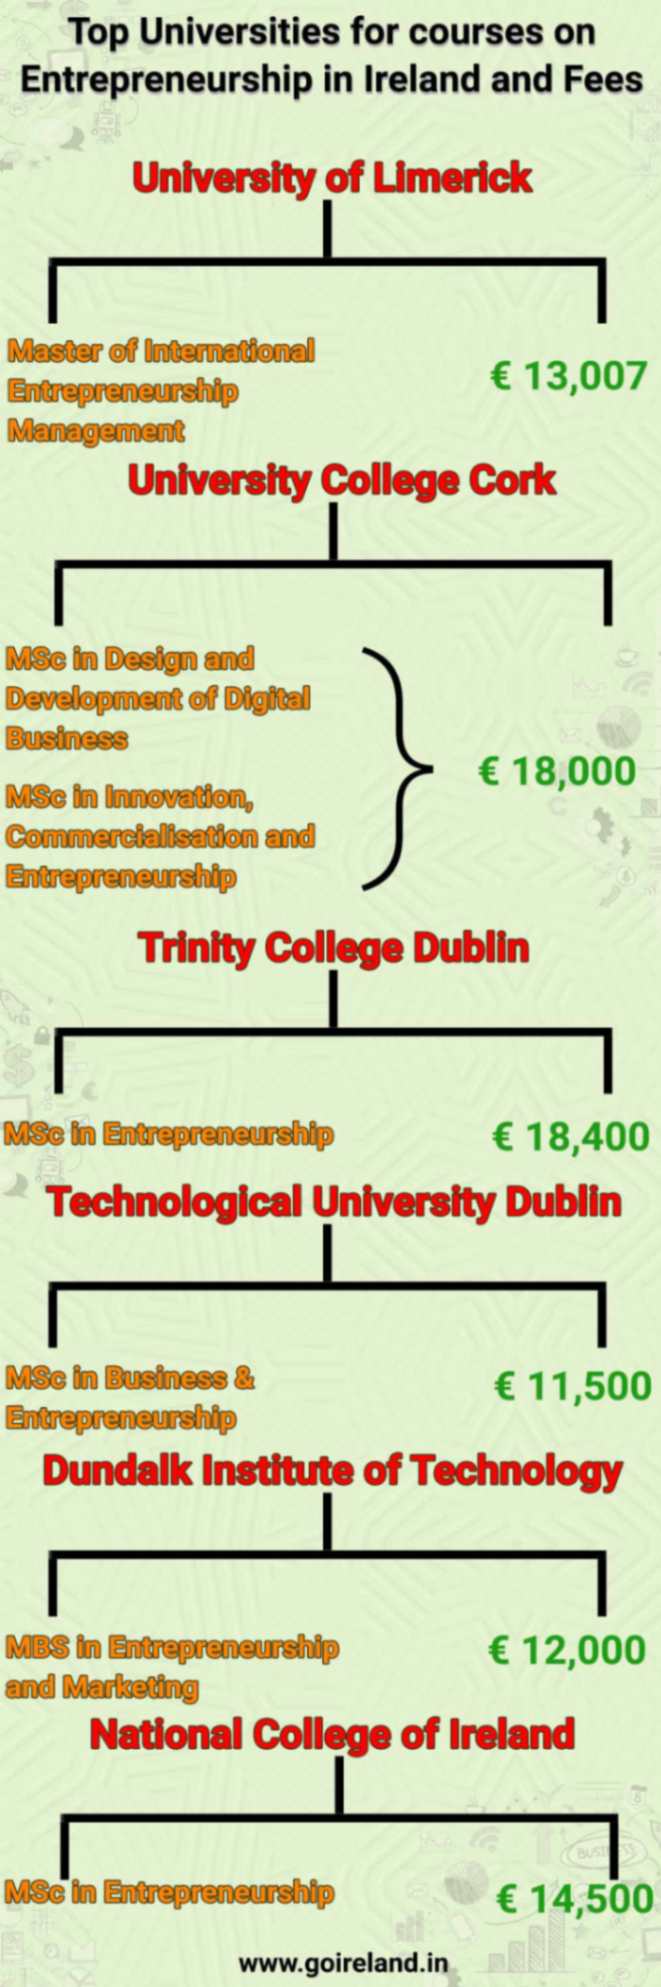 Top Universities for courses on Entrepreneurship in Ireland and Fees